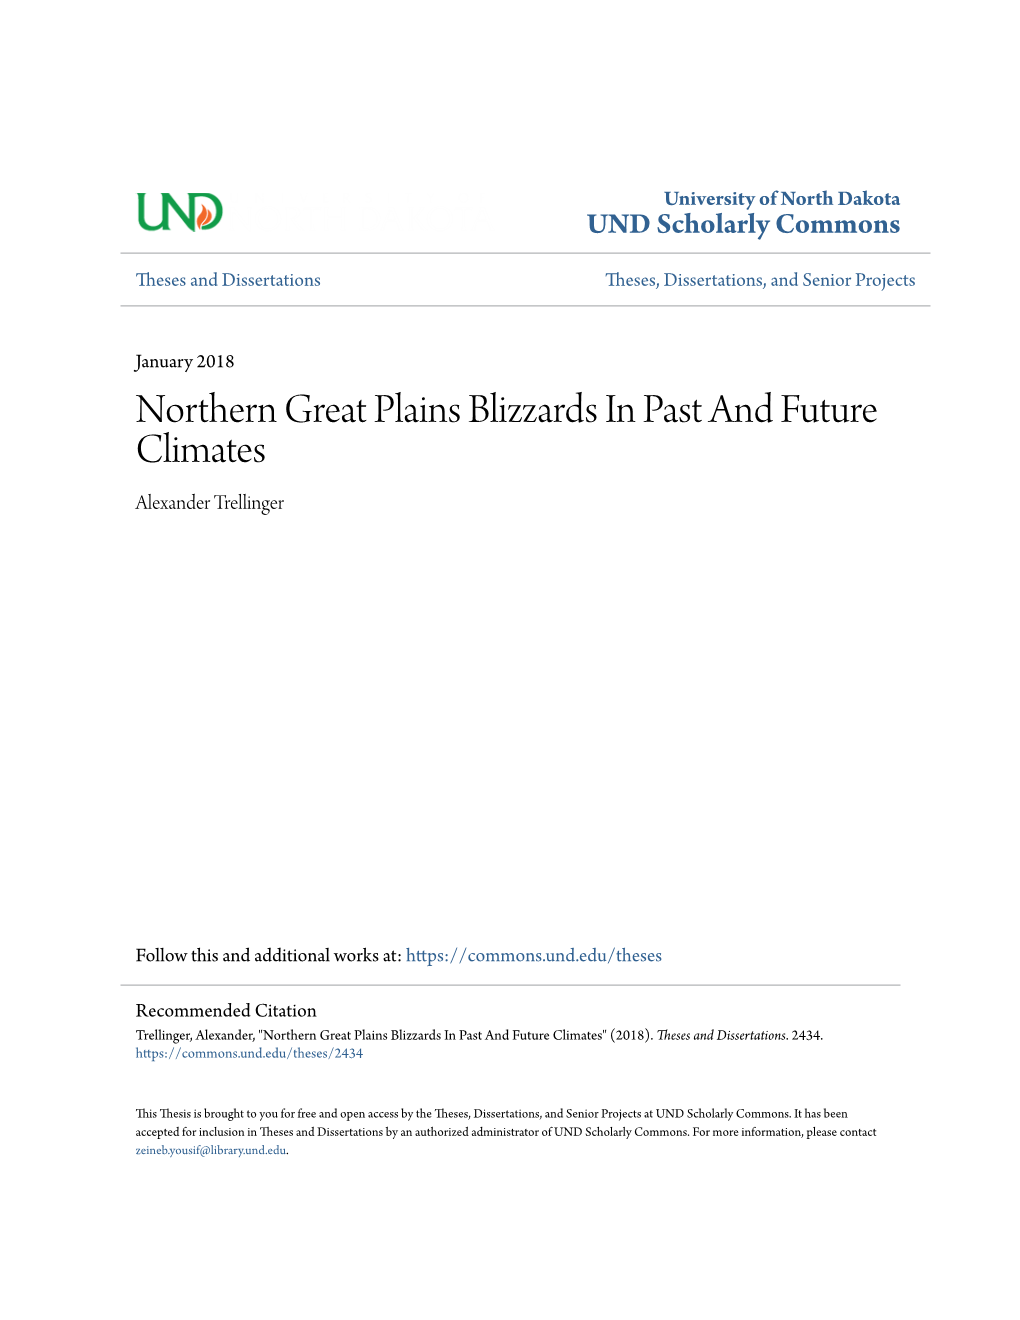 Northern Great Plains Blizzards in Past and Future Climates Alexander Trellinger